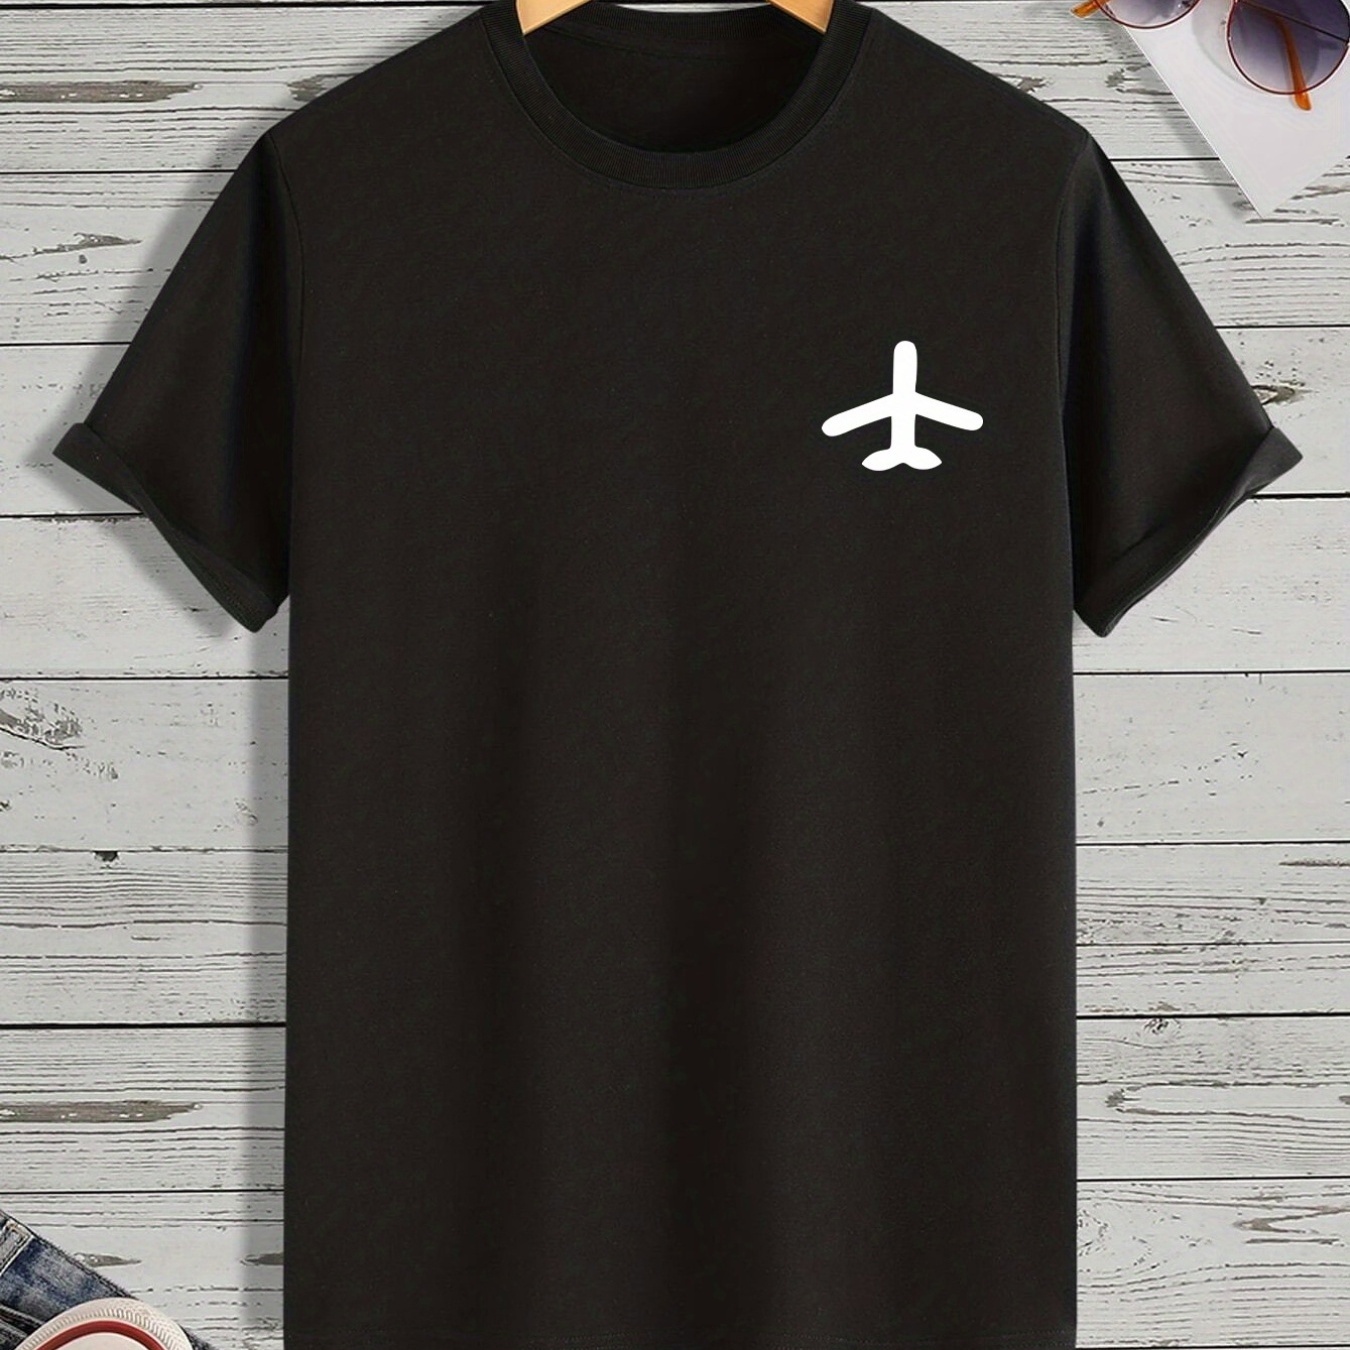 

Plane Round Neck T-shirts, Causal Tees, Short Sleeves Tops, Men's Summer Clothing